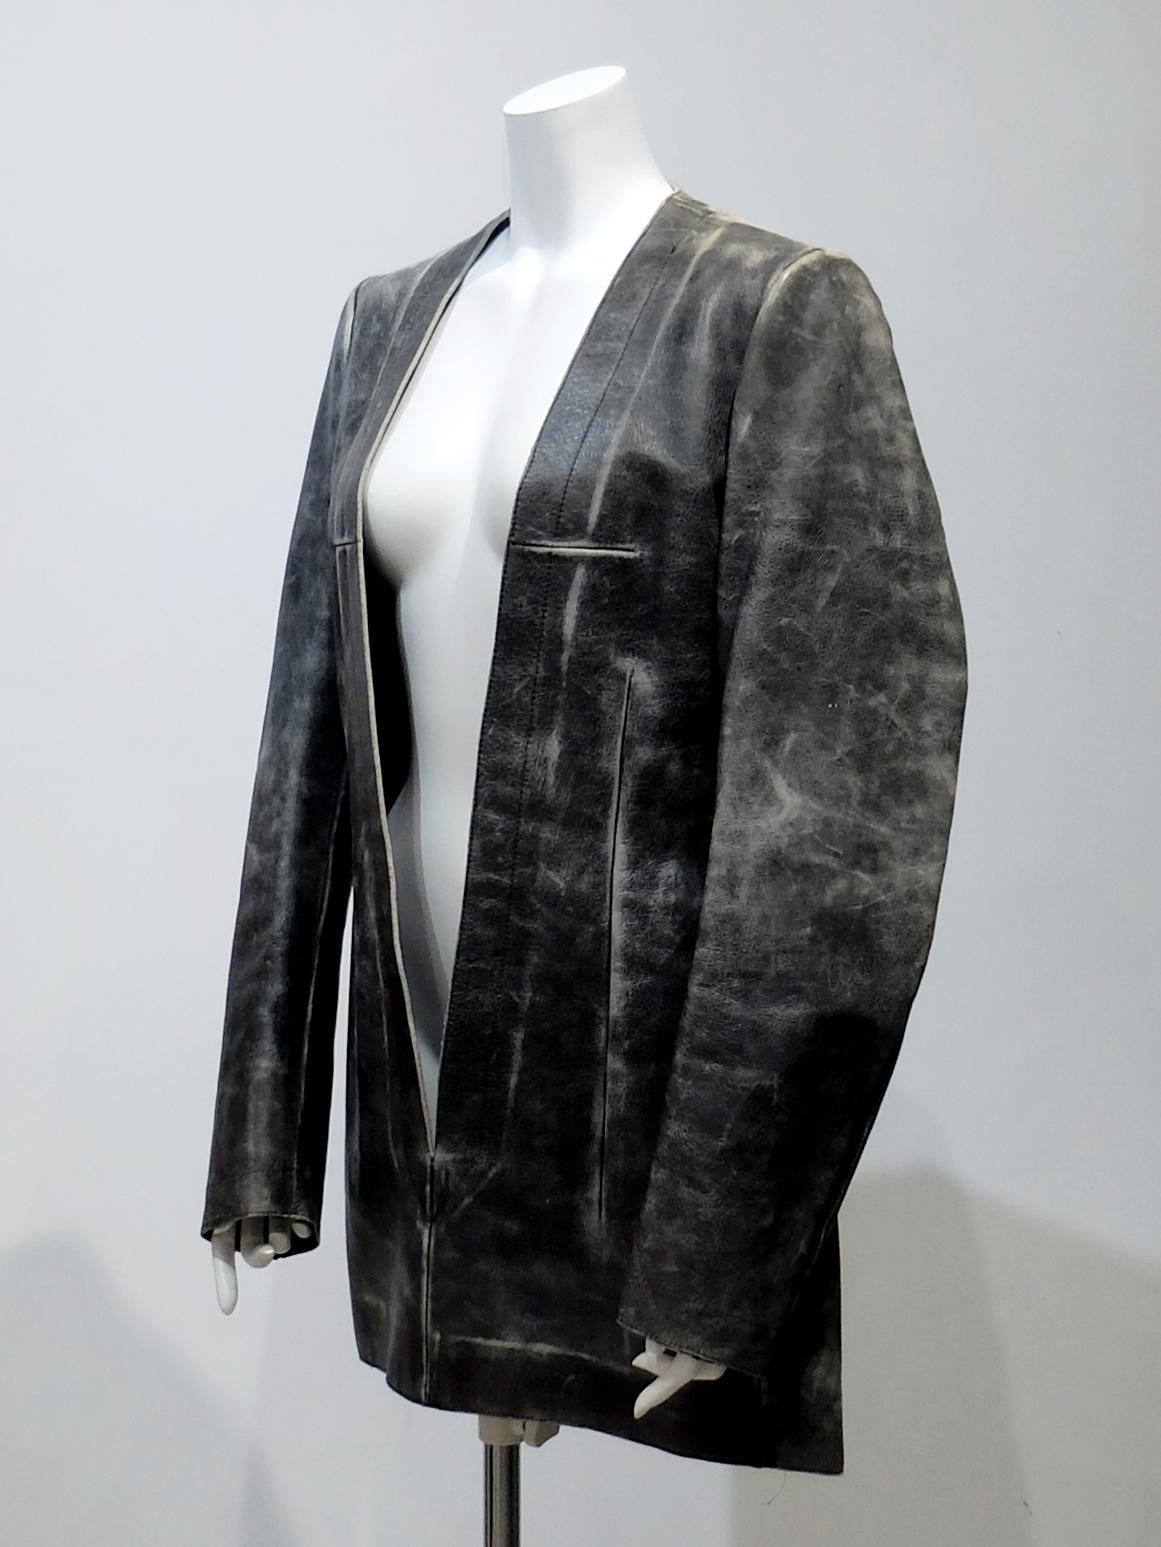 Maison Martin Margiela Leather Top In Excellent Condition For Sale In Shibuya-Ku, 13